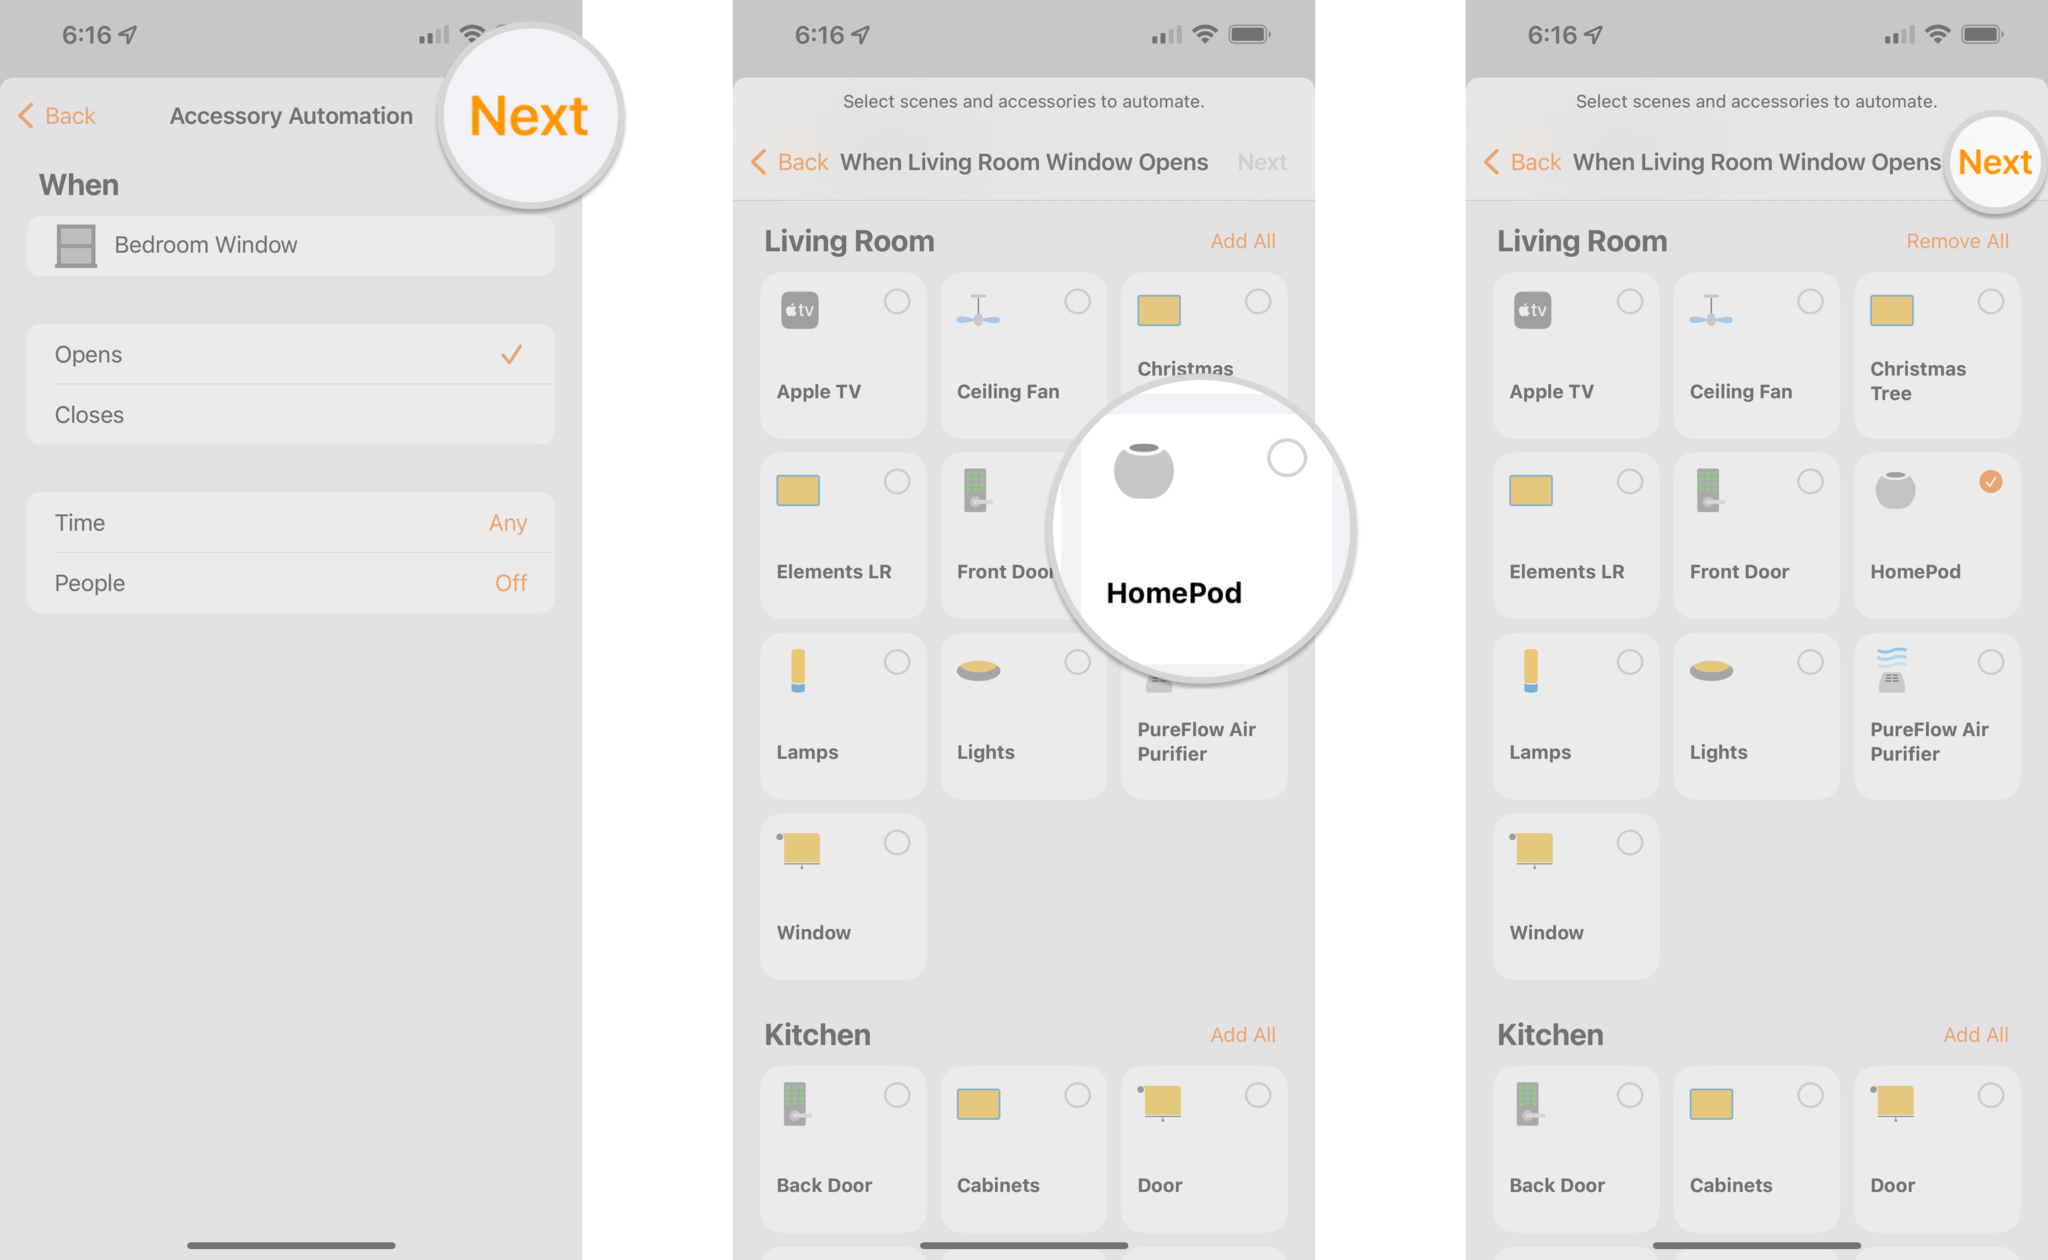 How to use HomePod as a HomeKit alarm in the iPhone by showing steps: Tap Next, Tap your HomePod, Tap Next